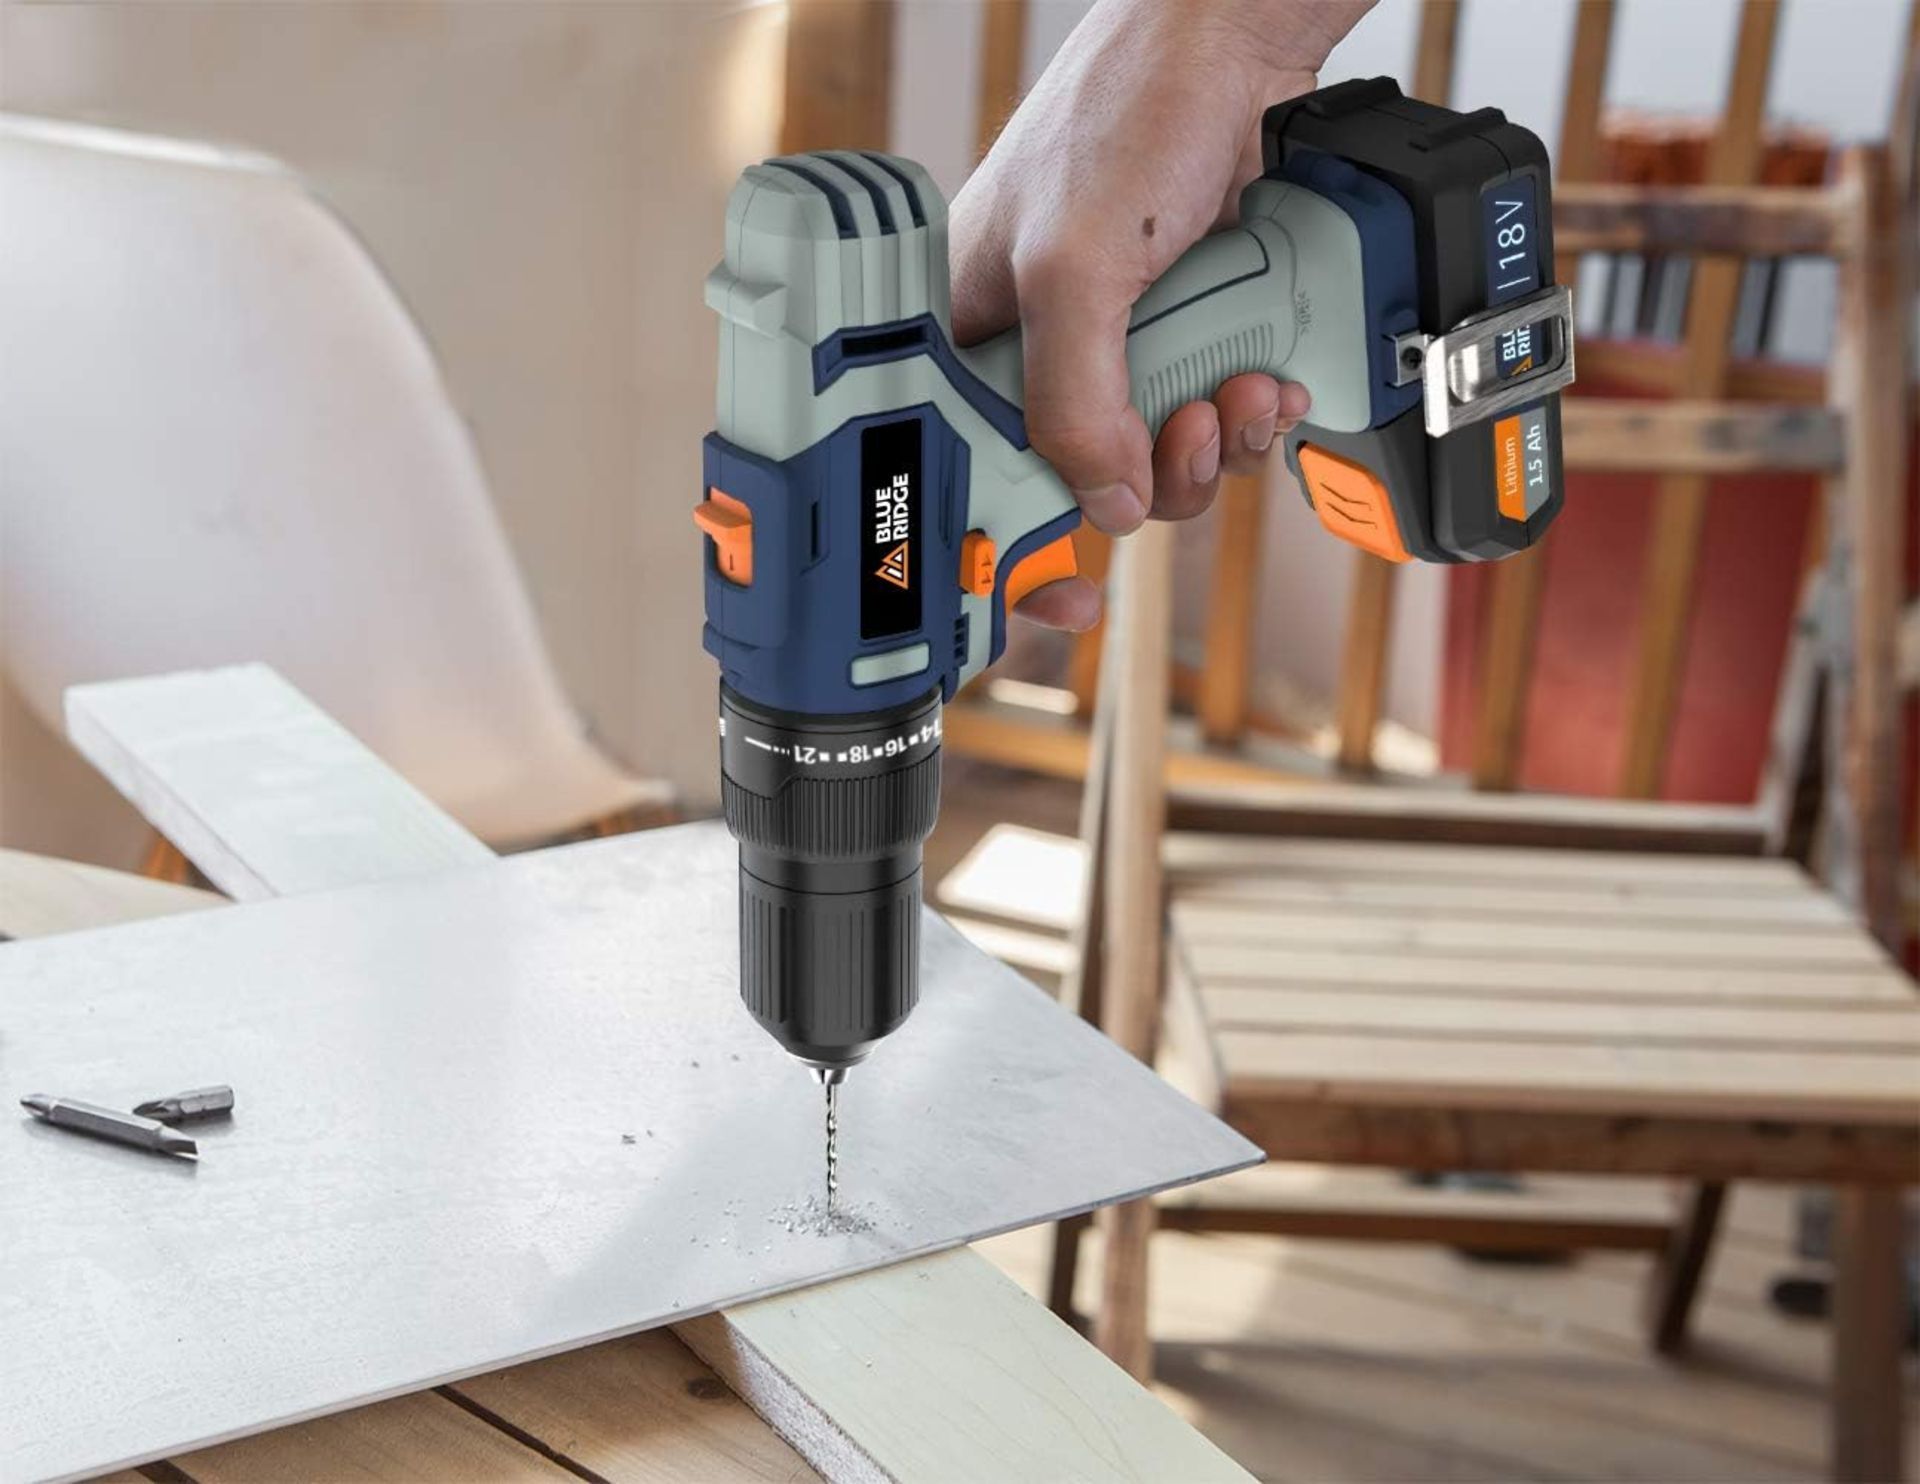 2x NEW & BOXED BLUE RIDGE 18V Cordless Hammer Drill with 2 x 1.5 Ah Li-ion Batteries & 43 Piece - Image 4 of 4